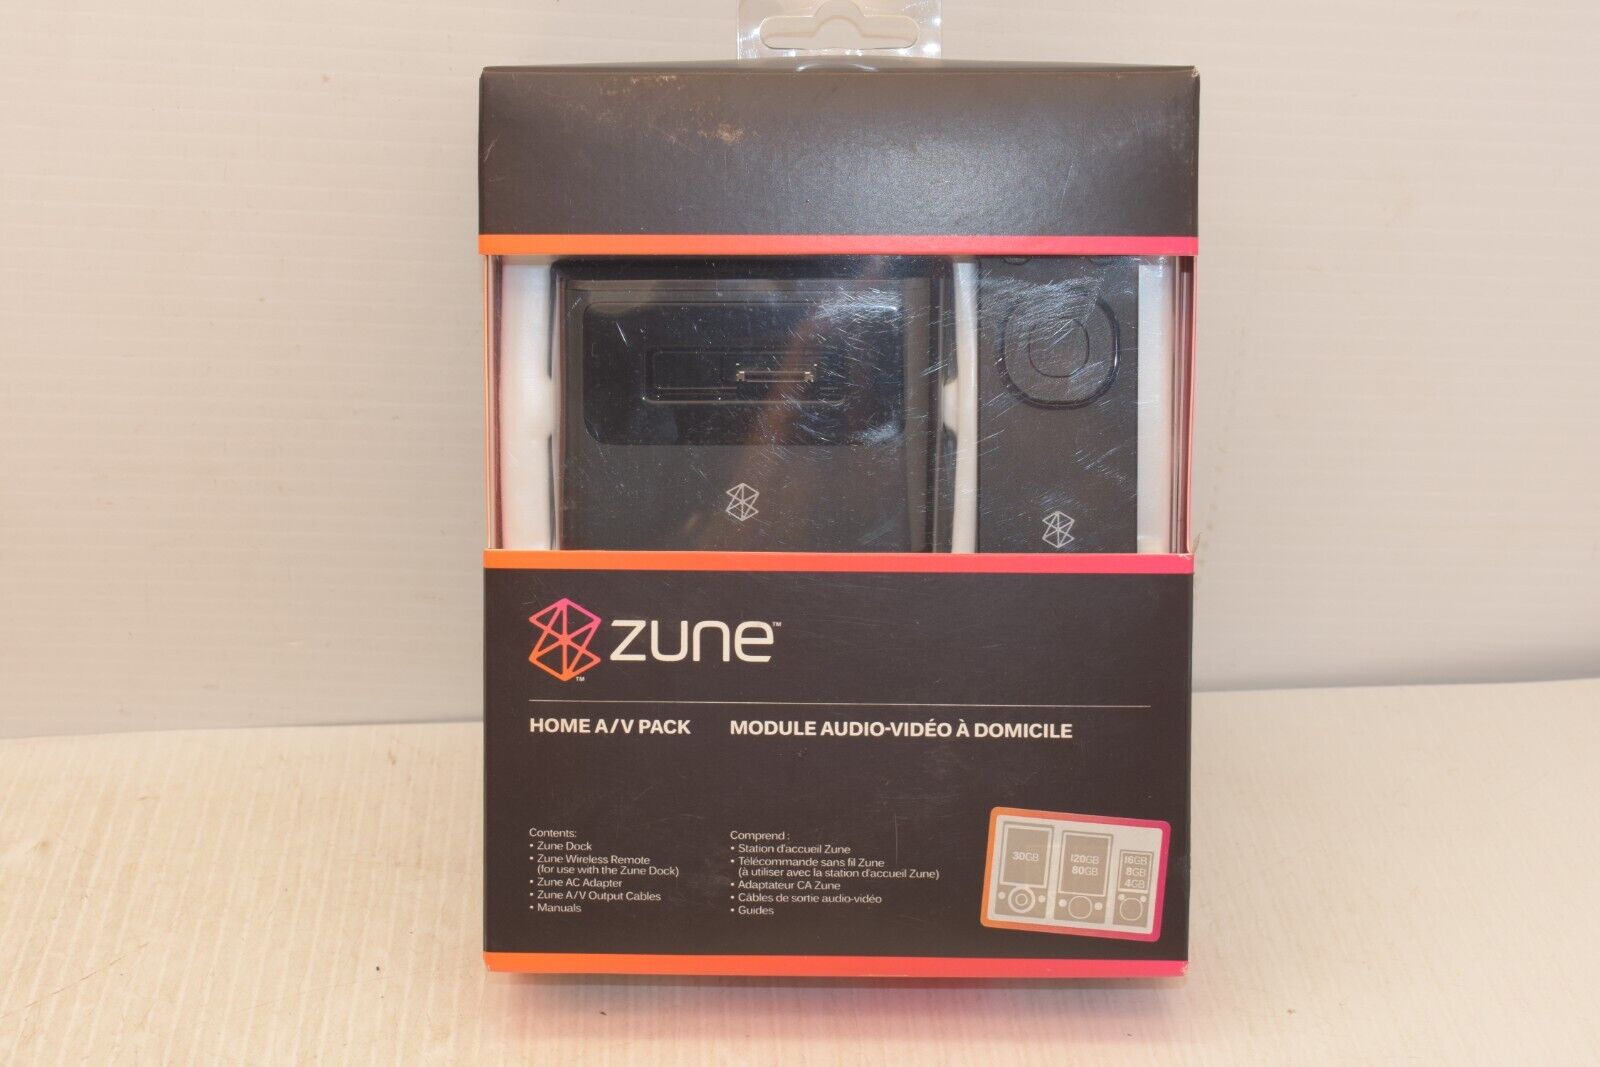 Zune Home A/v Pack - Dock, Remote, Ac Adapter, A/v Output Cables, Manual